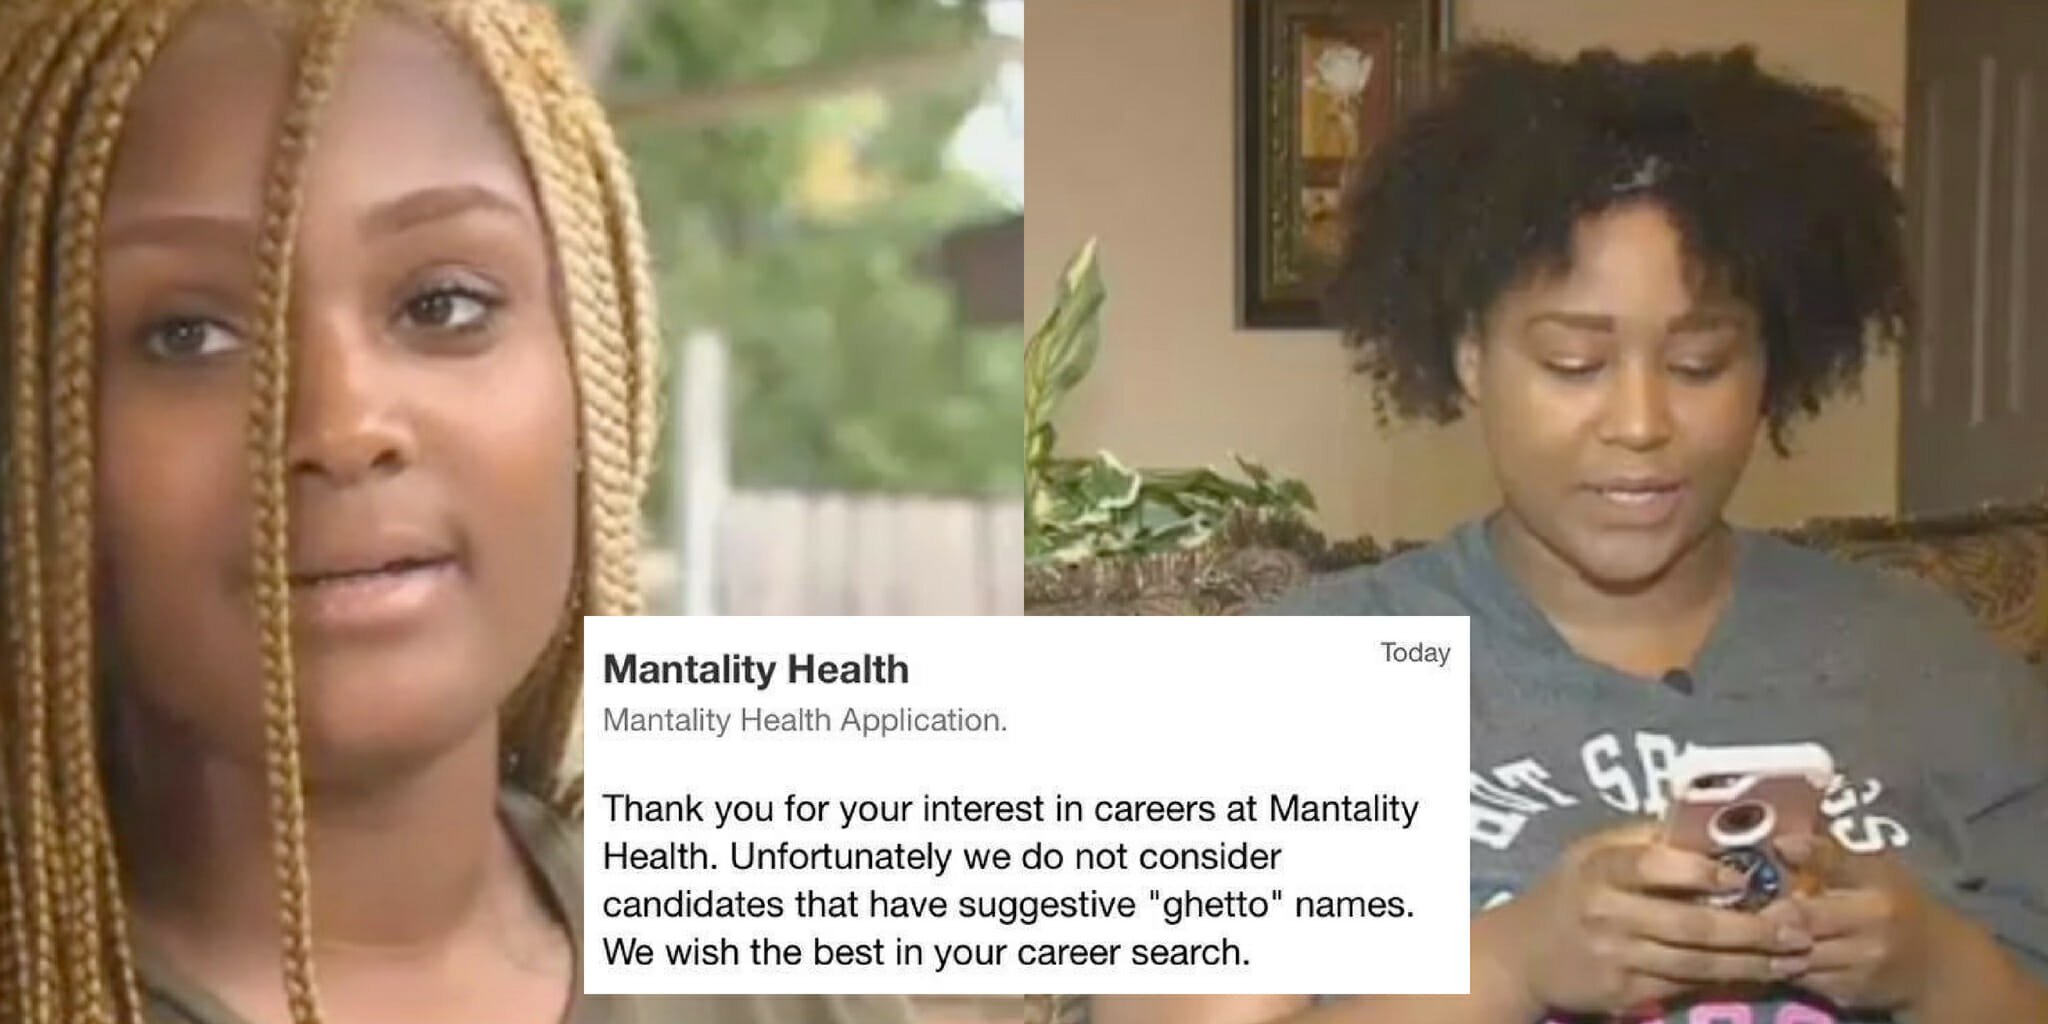 20 Women Received Job Rejection Email Saying Names Were 'Ghetto'